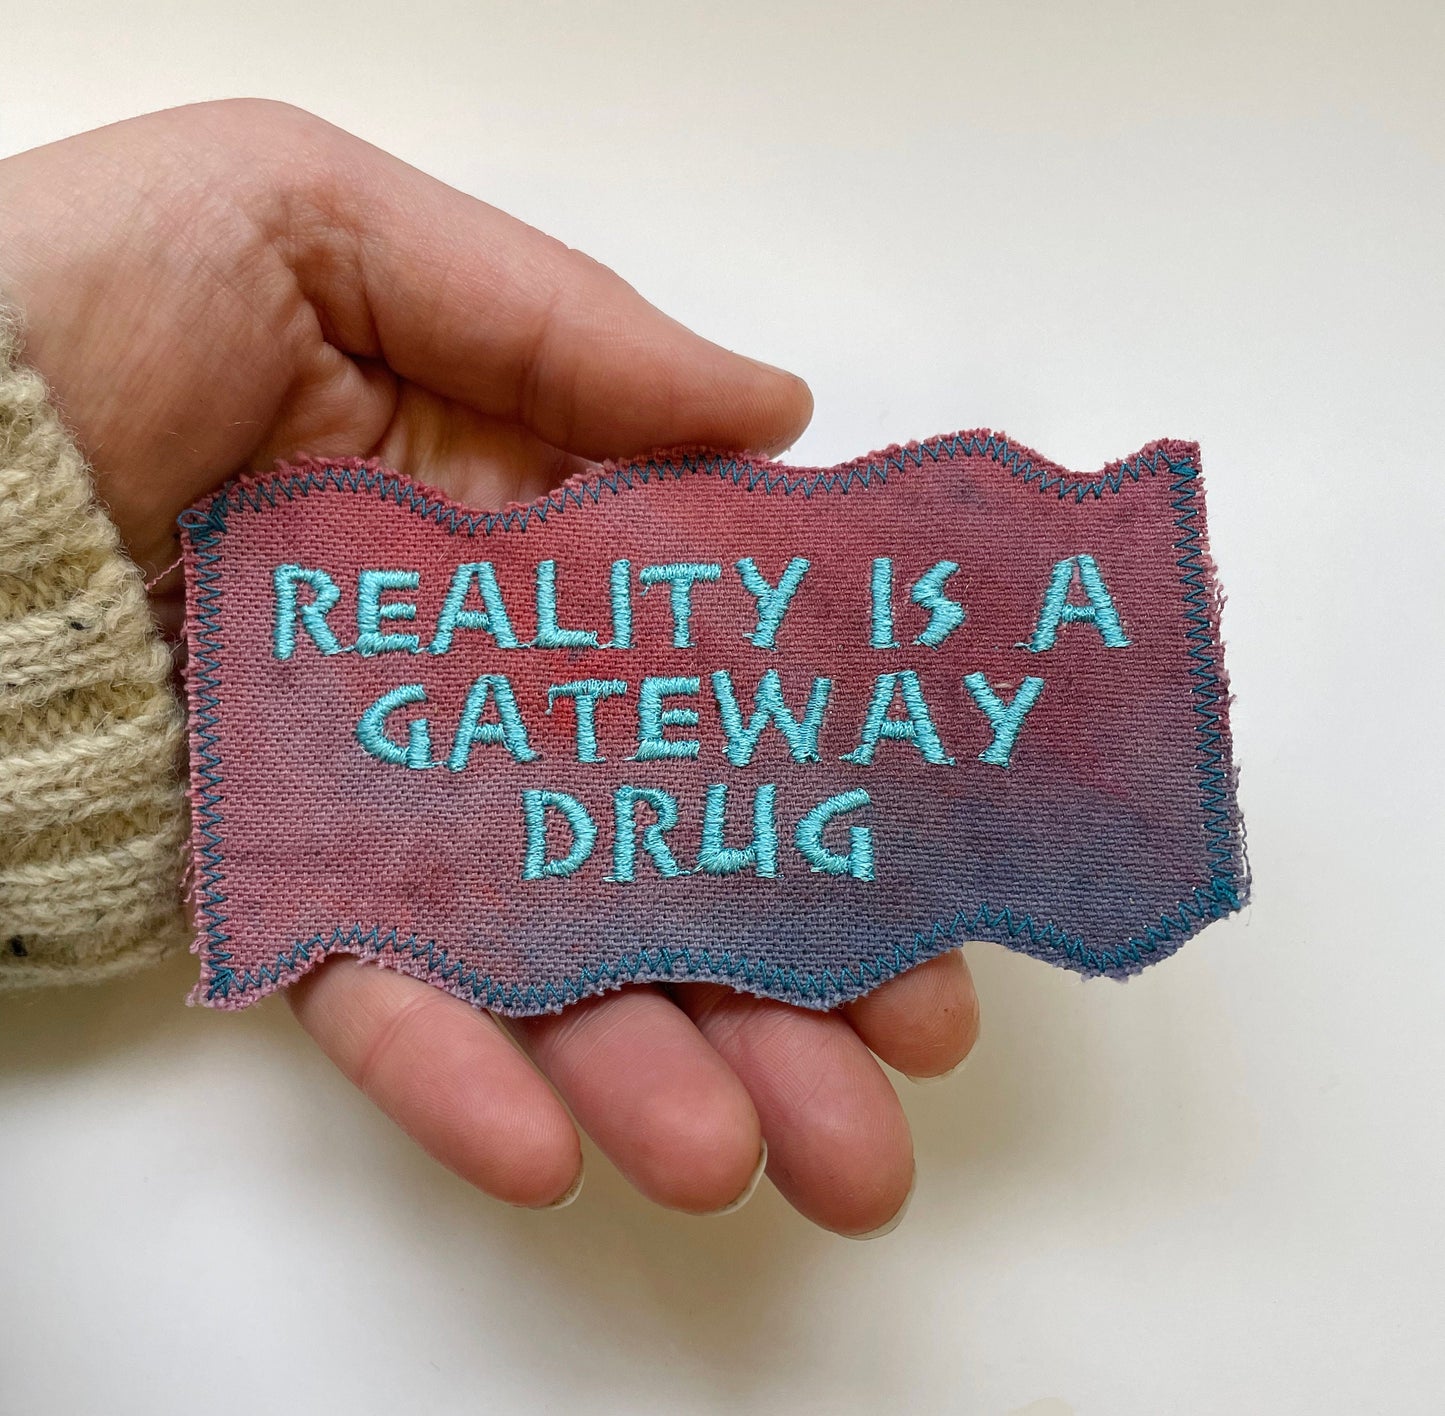 a hand holding a piece of cloth that says reality is a gateway drug